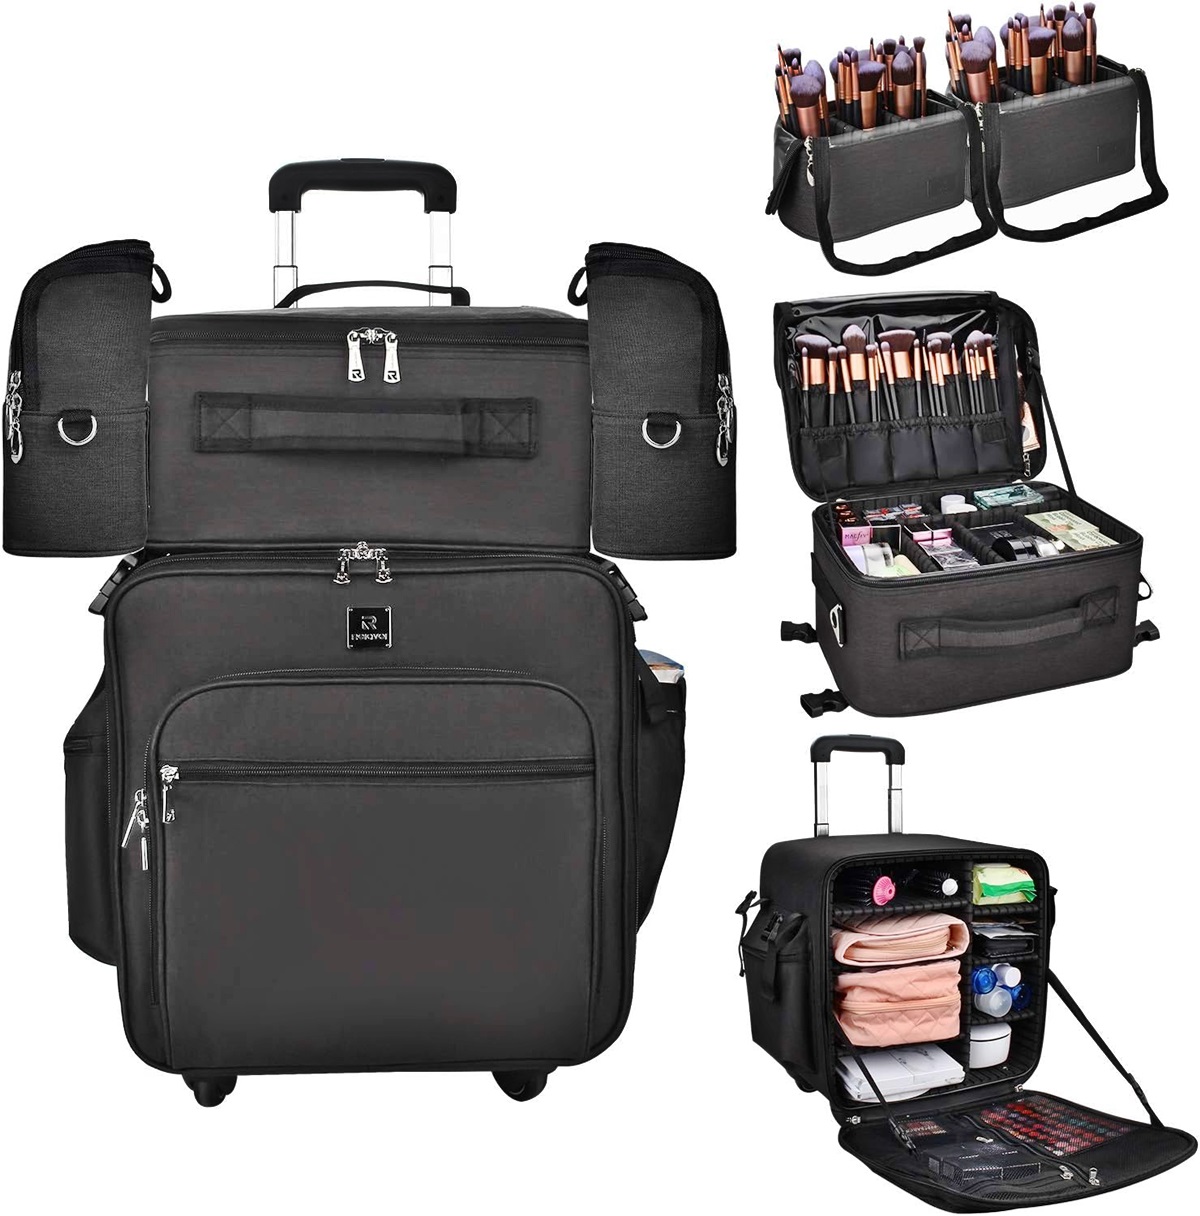 12-best-relavel-travel-makeup-train-case-makeup-cosmetic-case-organizer-for-2023